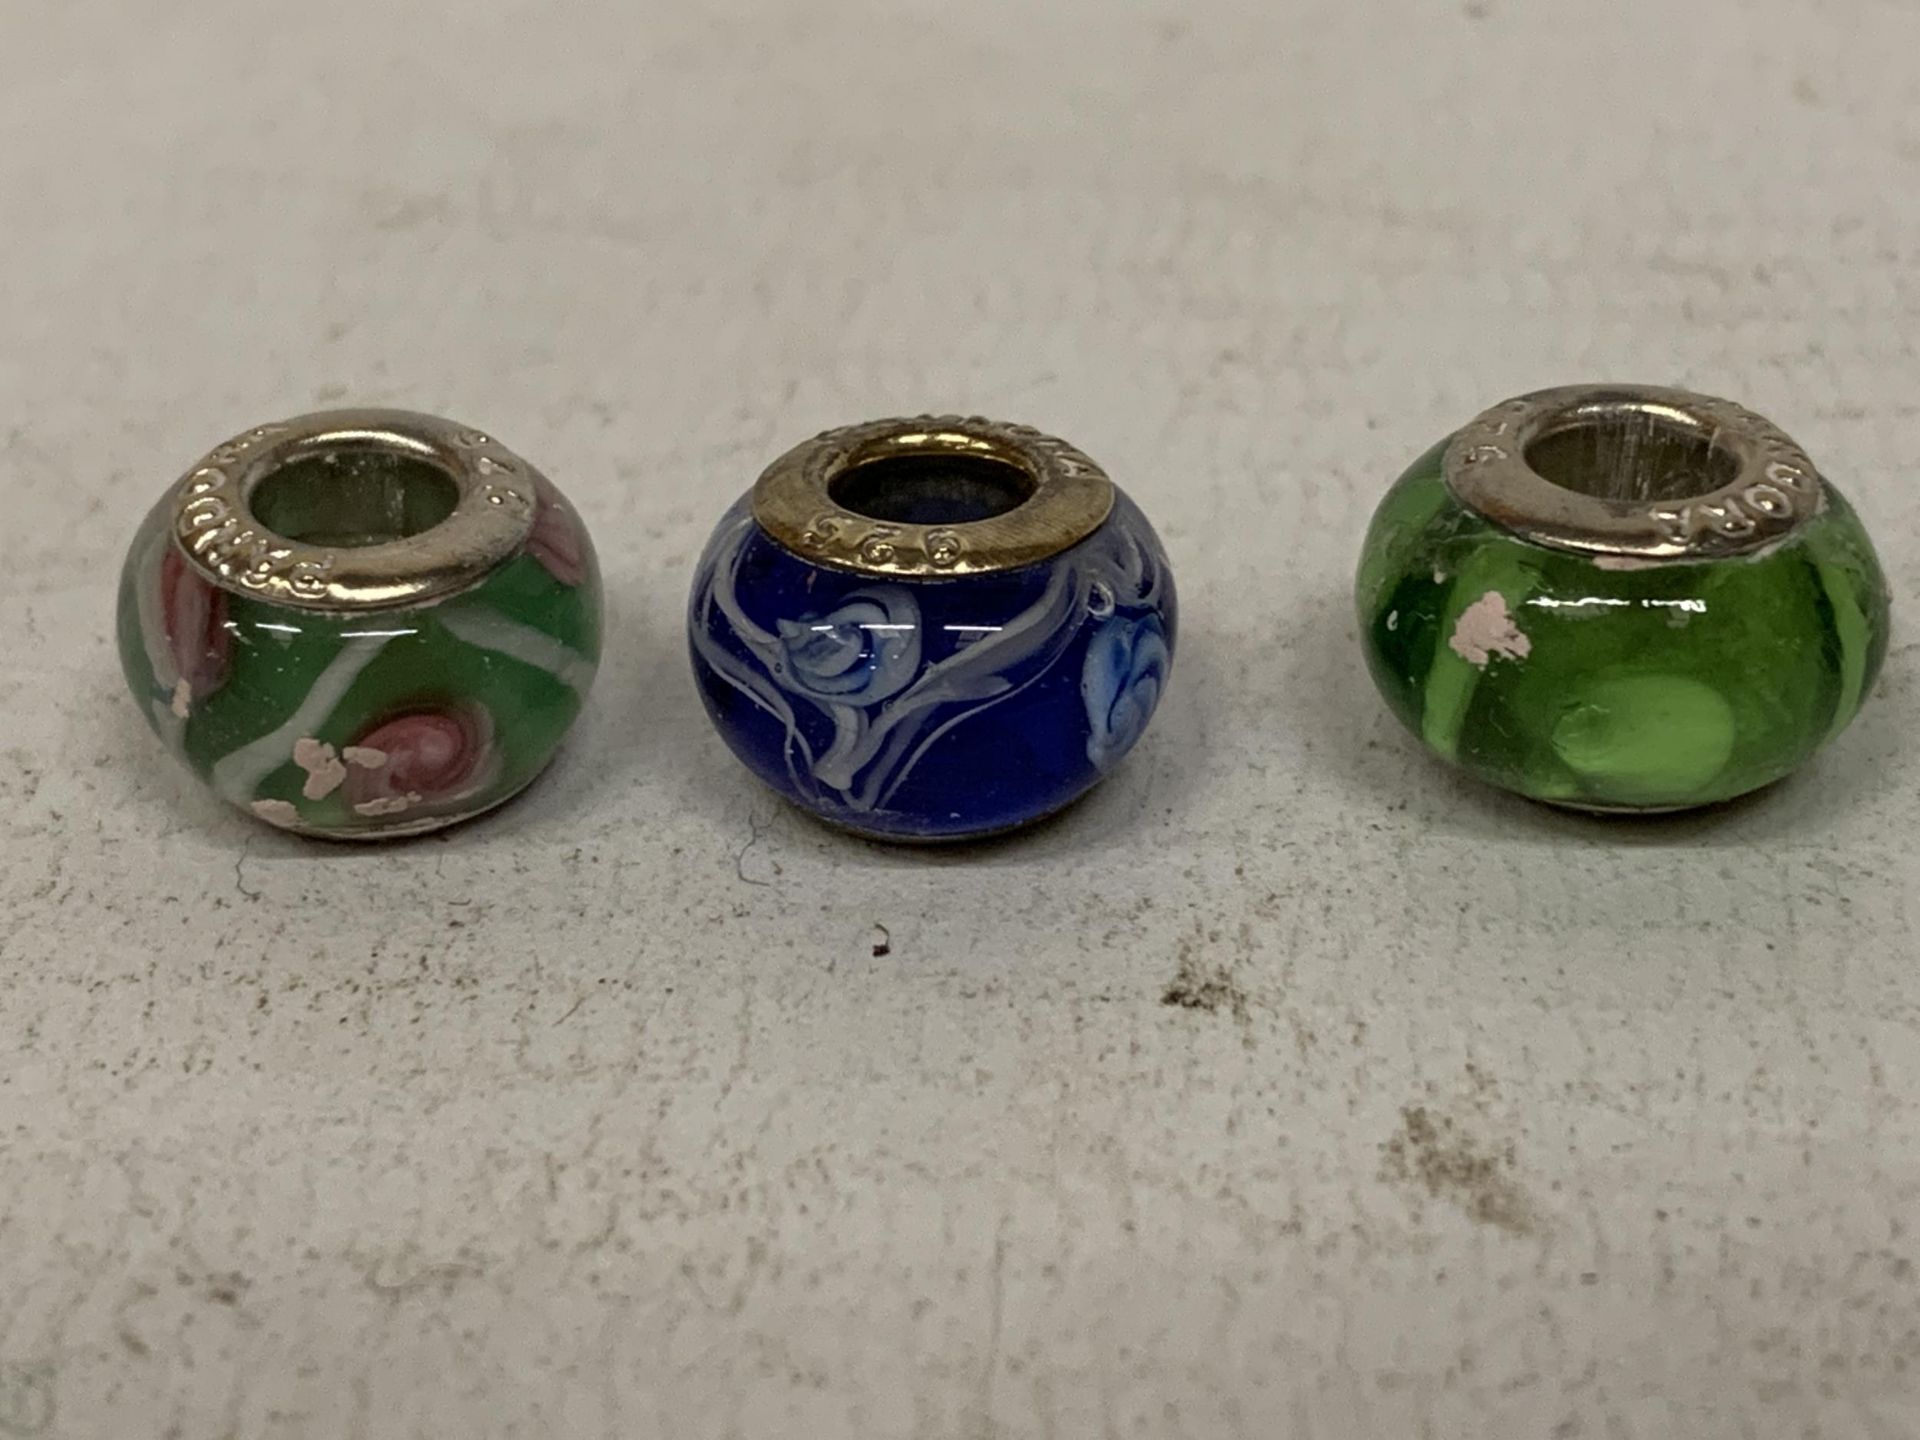 FIFTEEN PANDORA STYLE BEADS WITH 925 SILVER INNER - Image 3 of 5